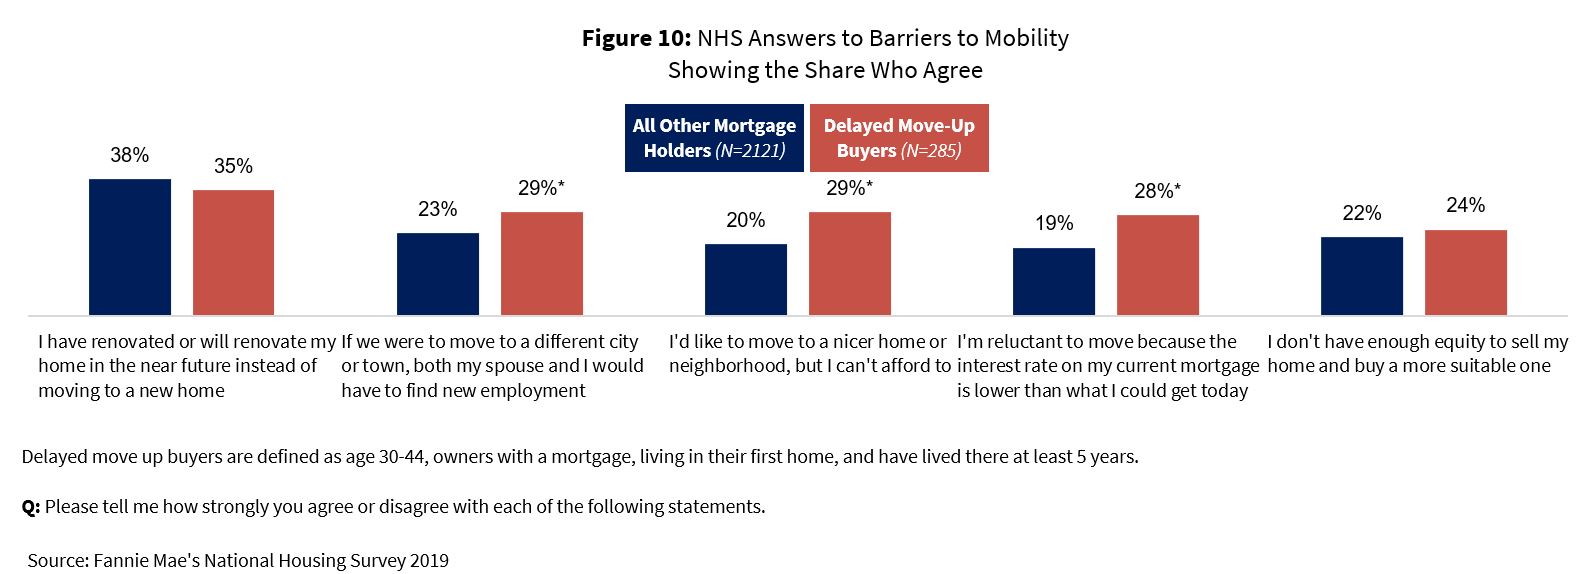 NHS Answers to Barriers to Mobility Showing the Share Who Agree